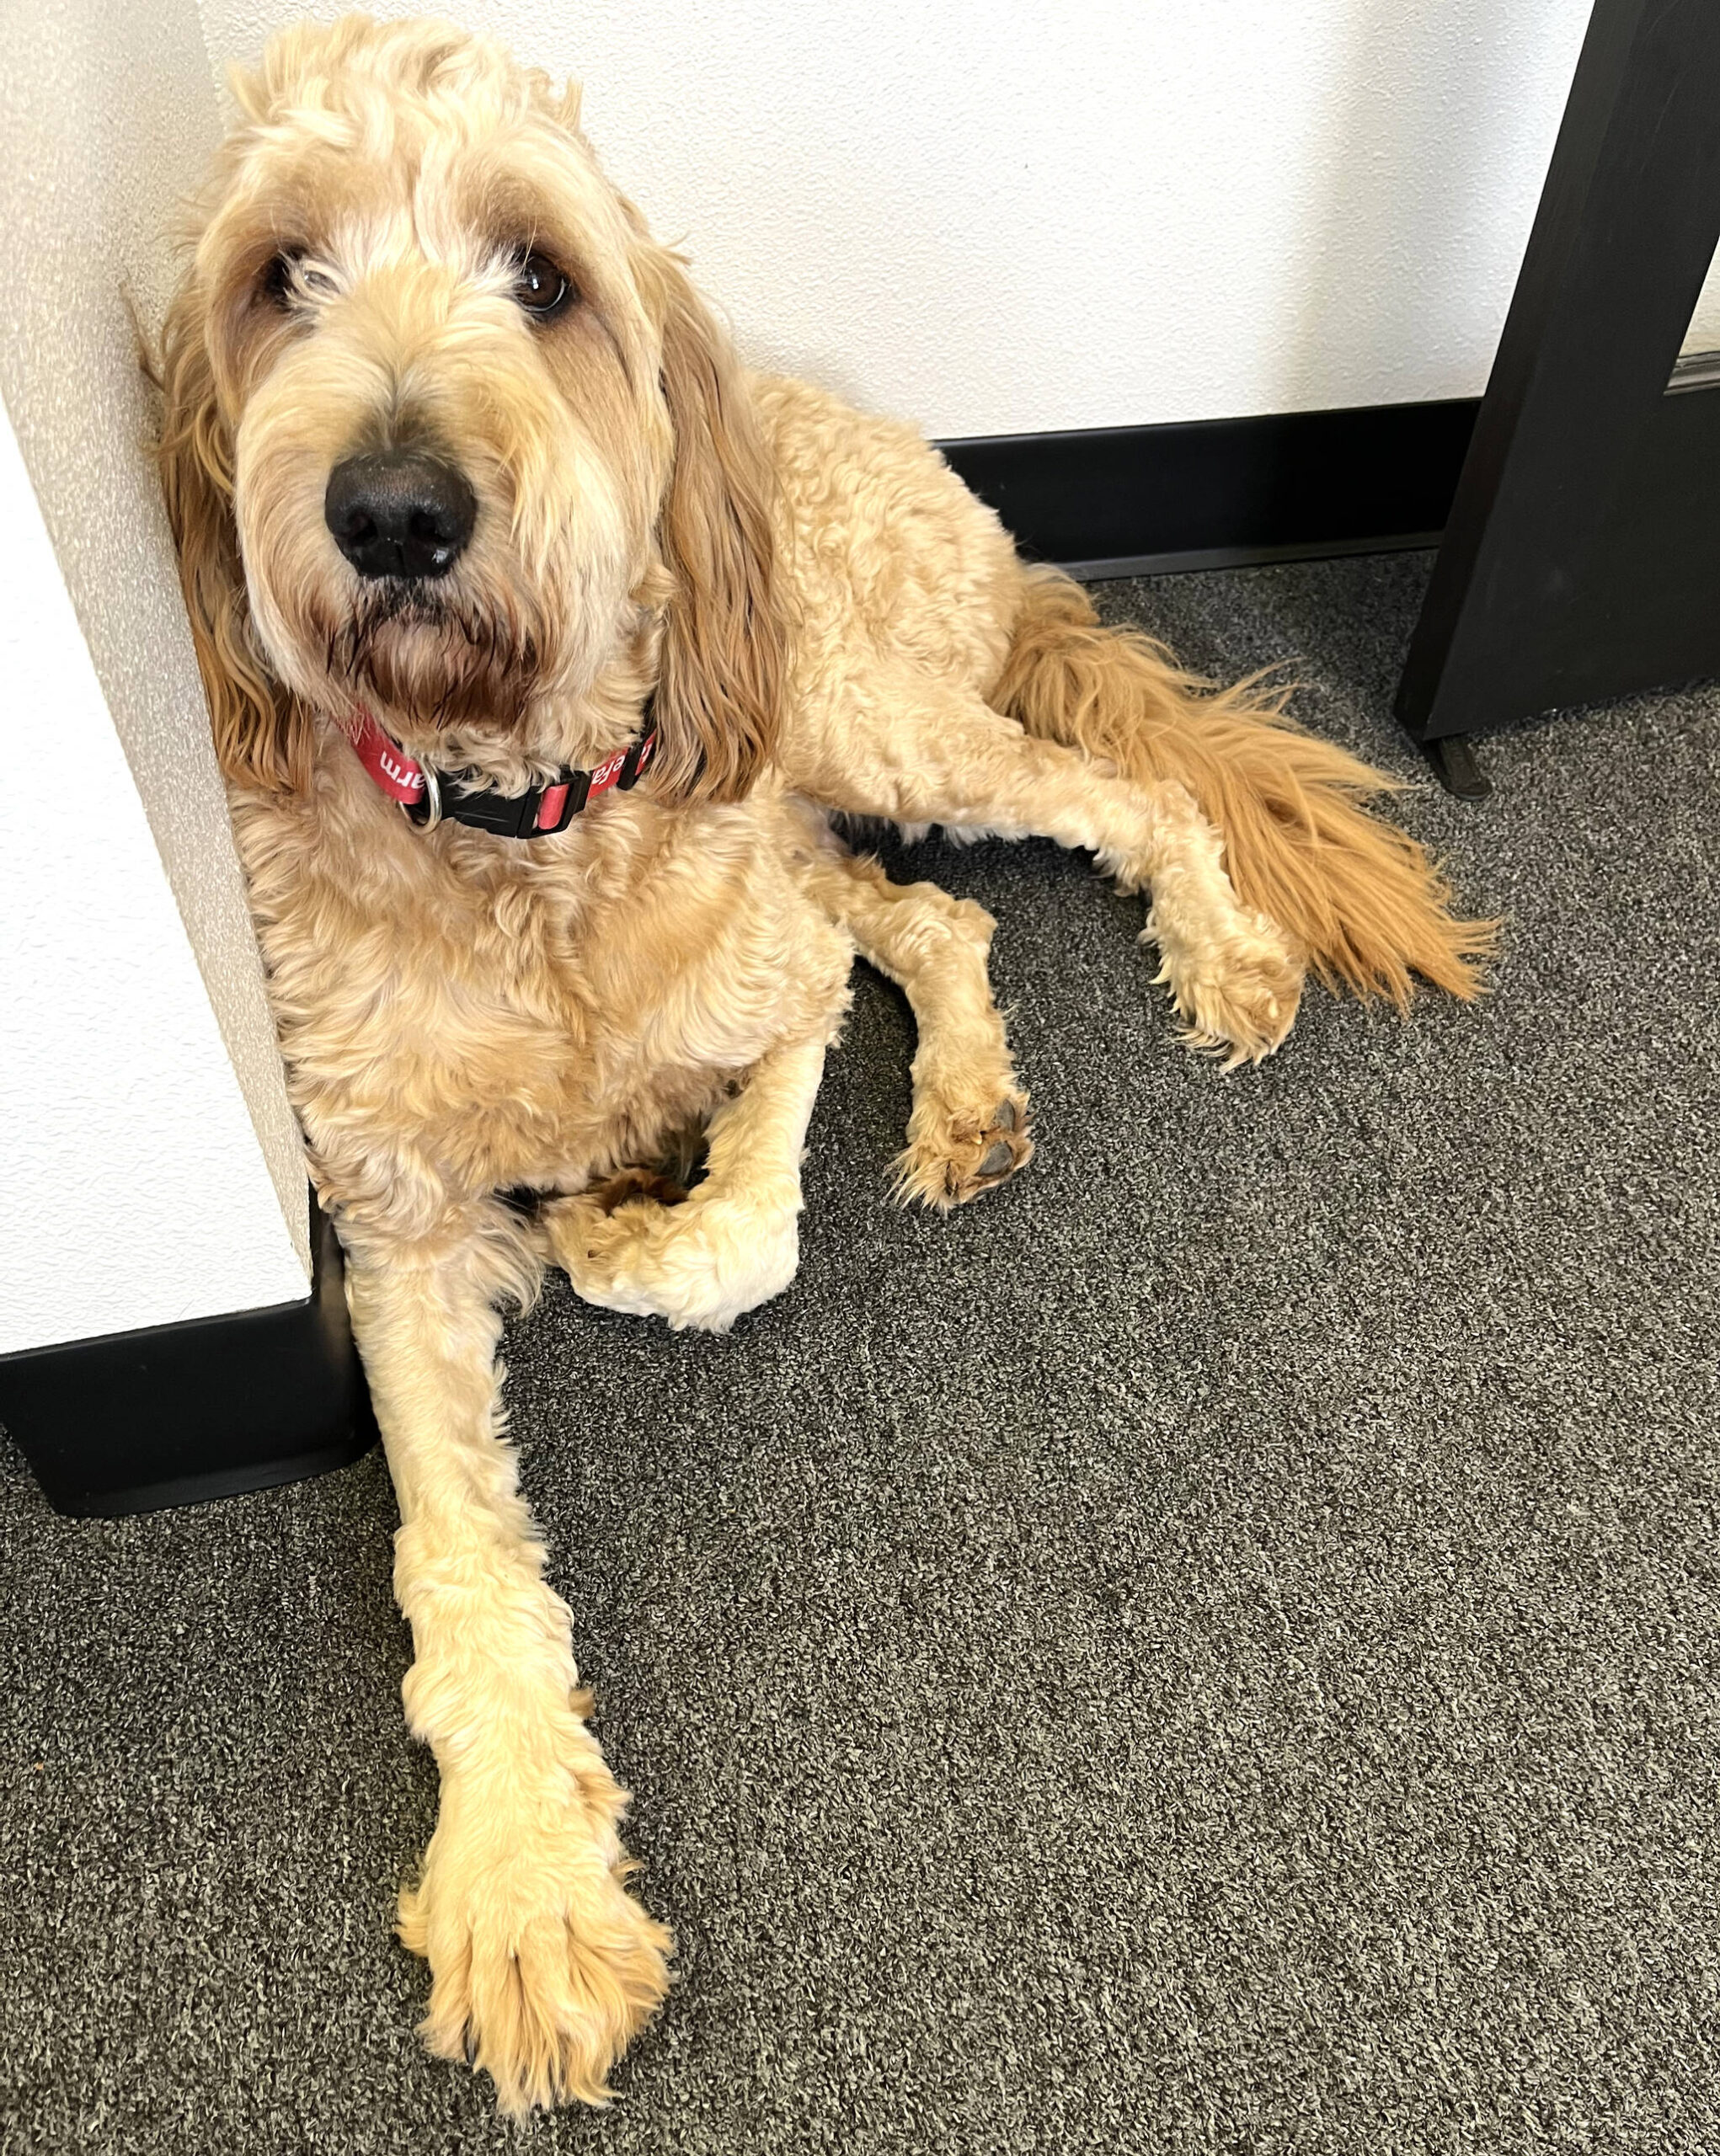 Bear, a one-year-old goldendoodle who is the “office dog” at David Steinman Insurance Agency Inc., in Aberdeen, is very much part of the team at 500 W. Wishkah St. Steinman talked about bringing Bear on tough calls. “If a customer is having a hard time, we have him sit next to them. We want to put him through therapy dog courses so he can go into nursing homes and schools.” Steinman wants Bear to go through the training so the office can have an additional way to give back to the Grays Harbor community. (Matthew N. Wells / The Daily World)